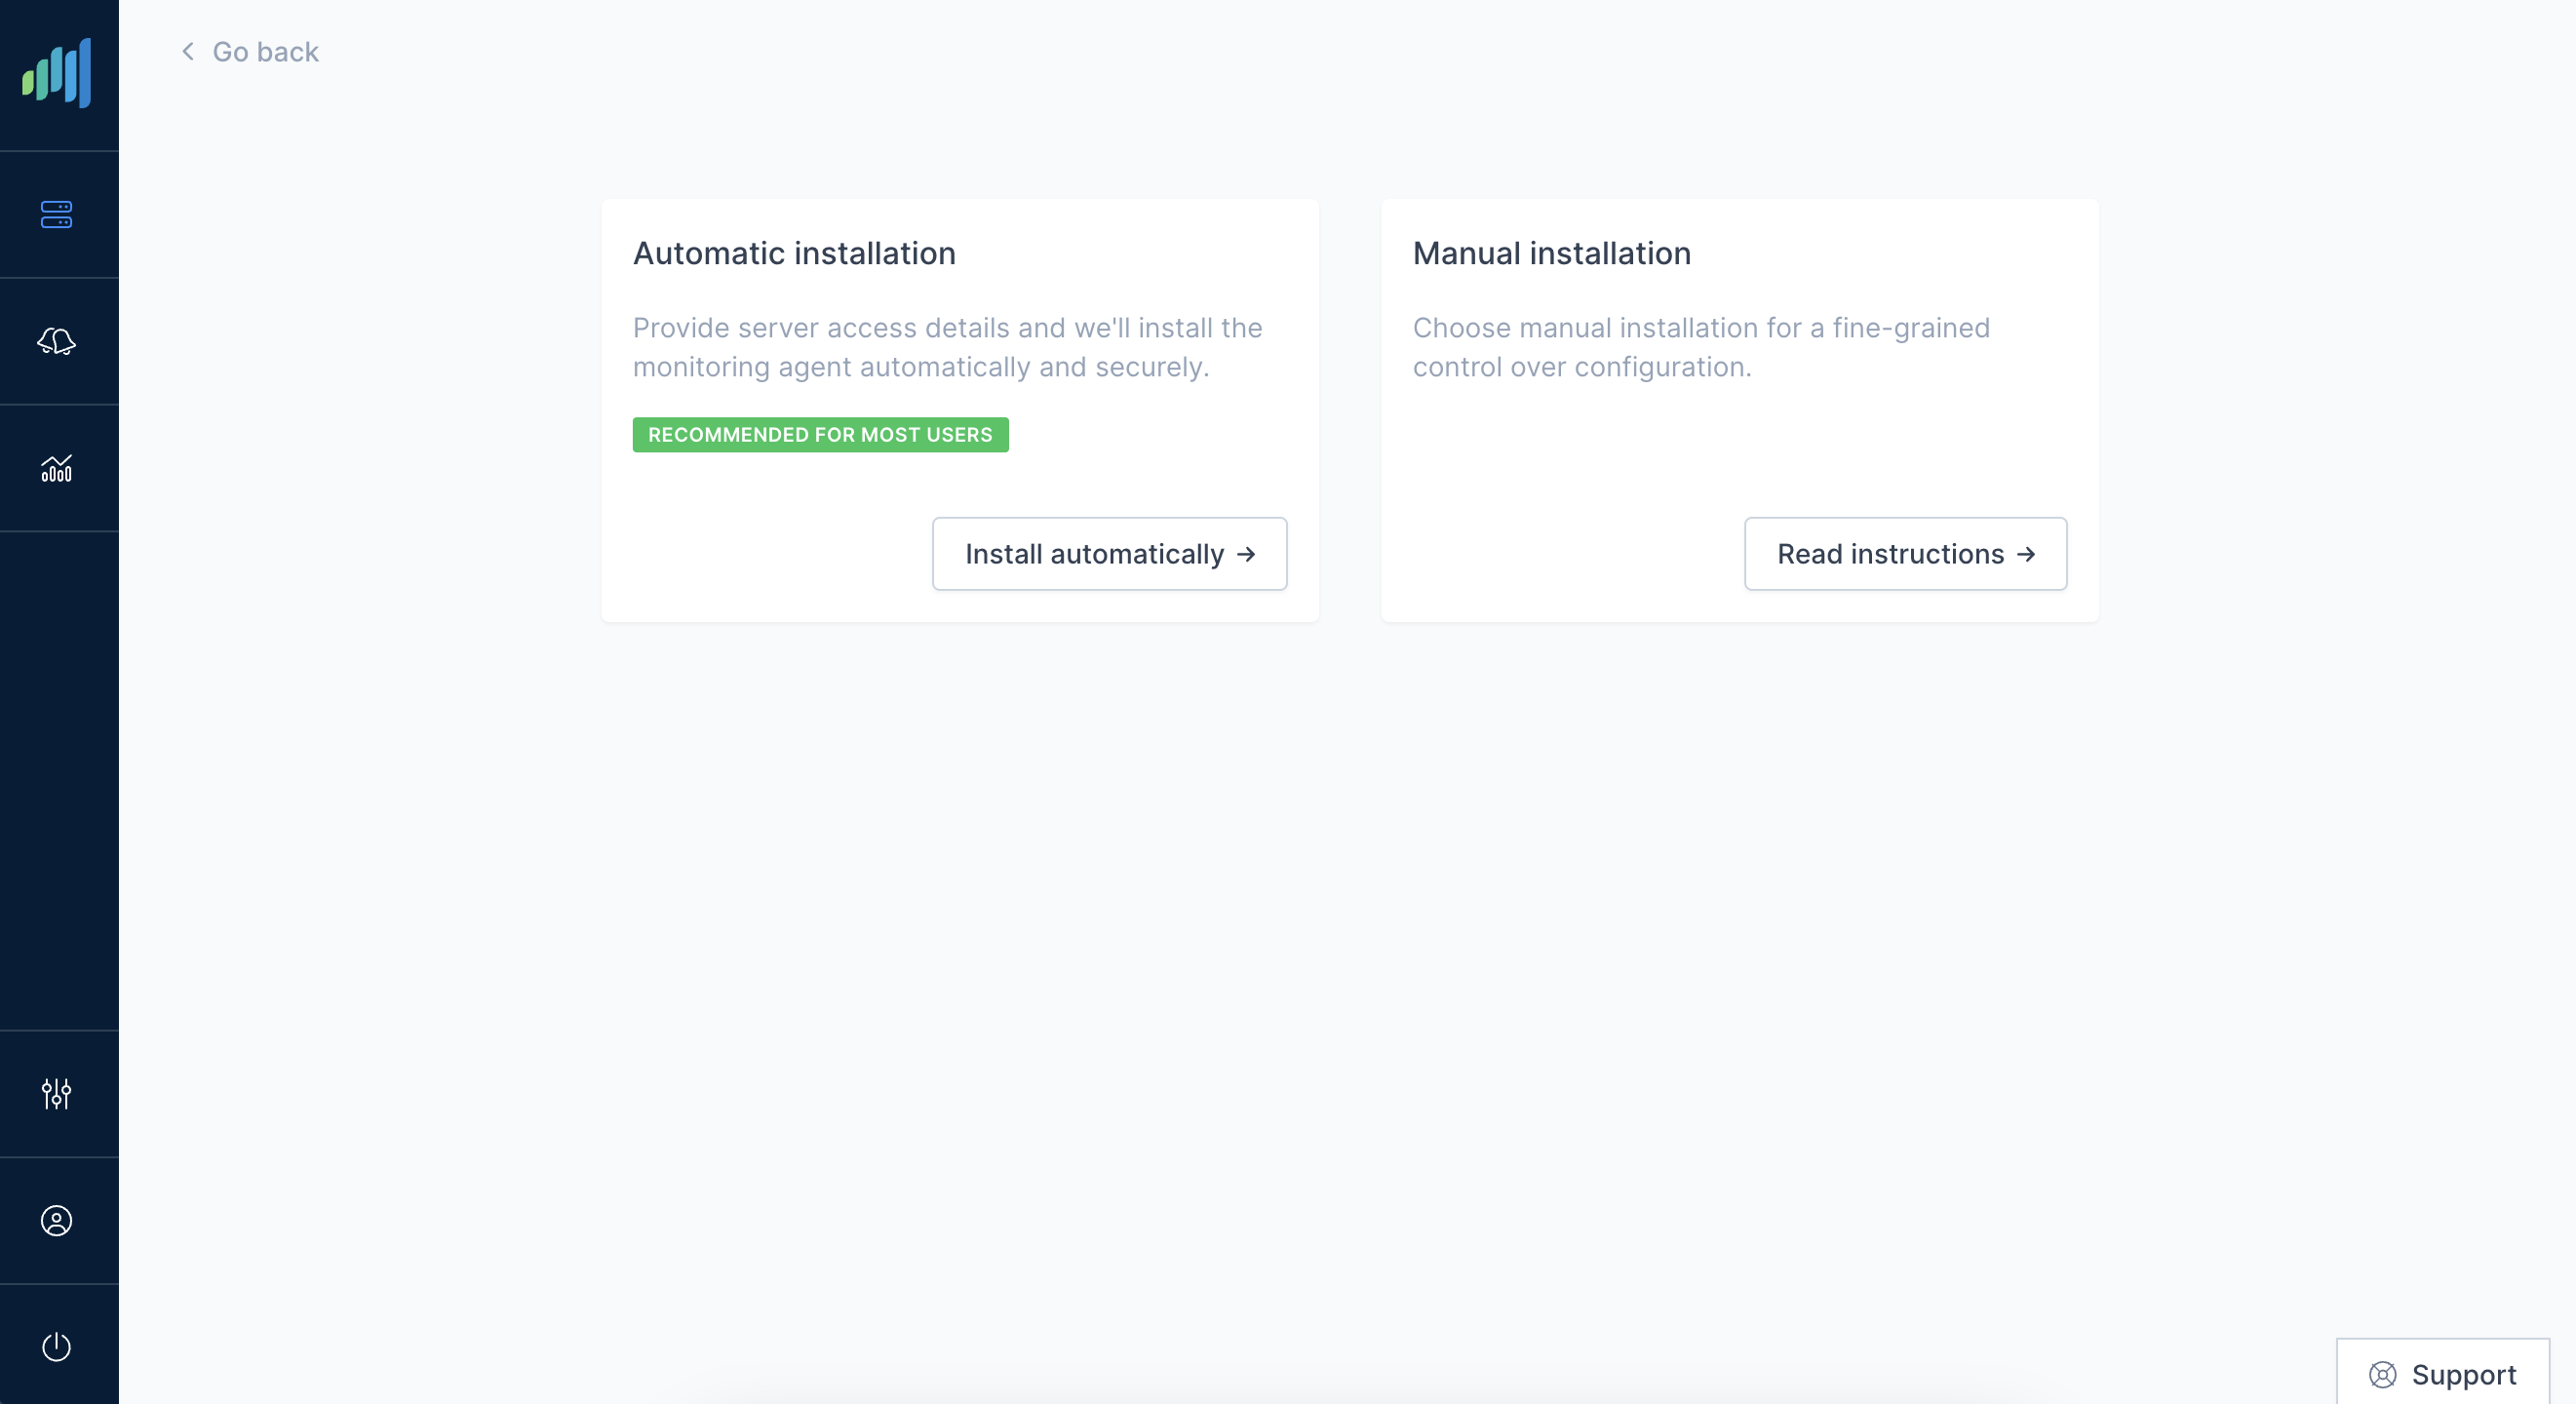 StackScout installation mode selection screen